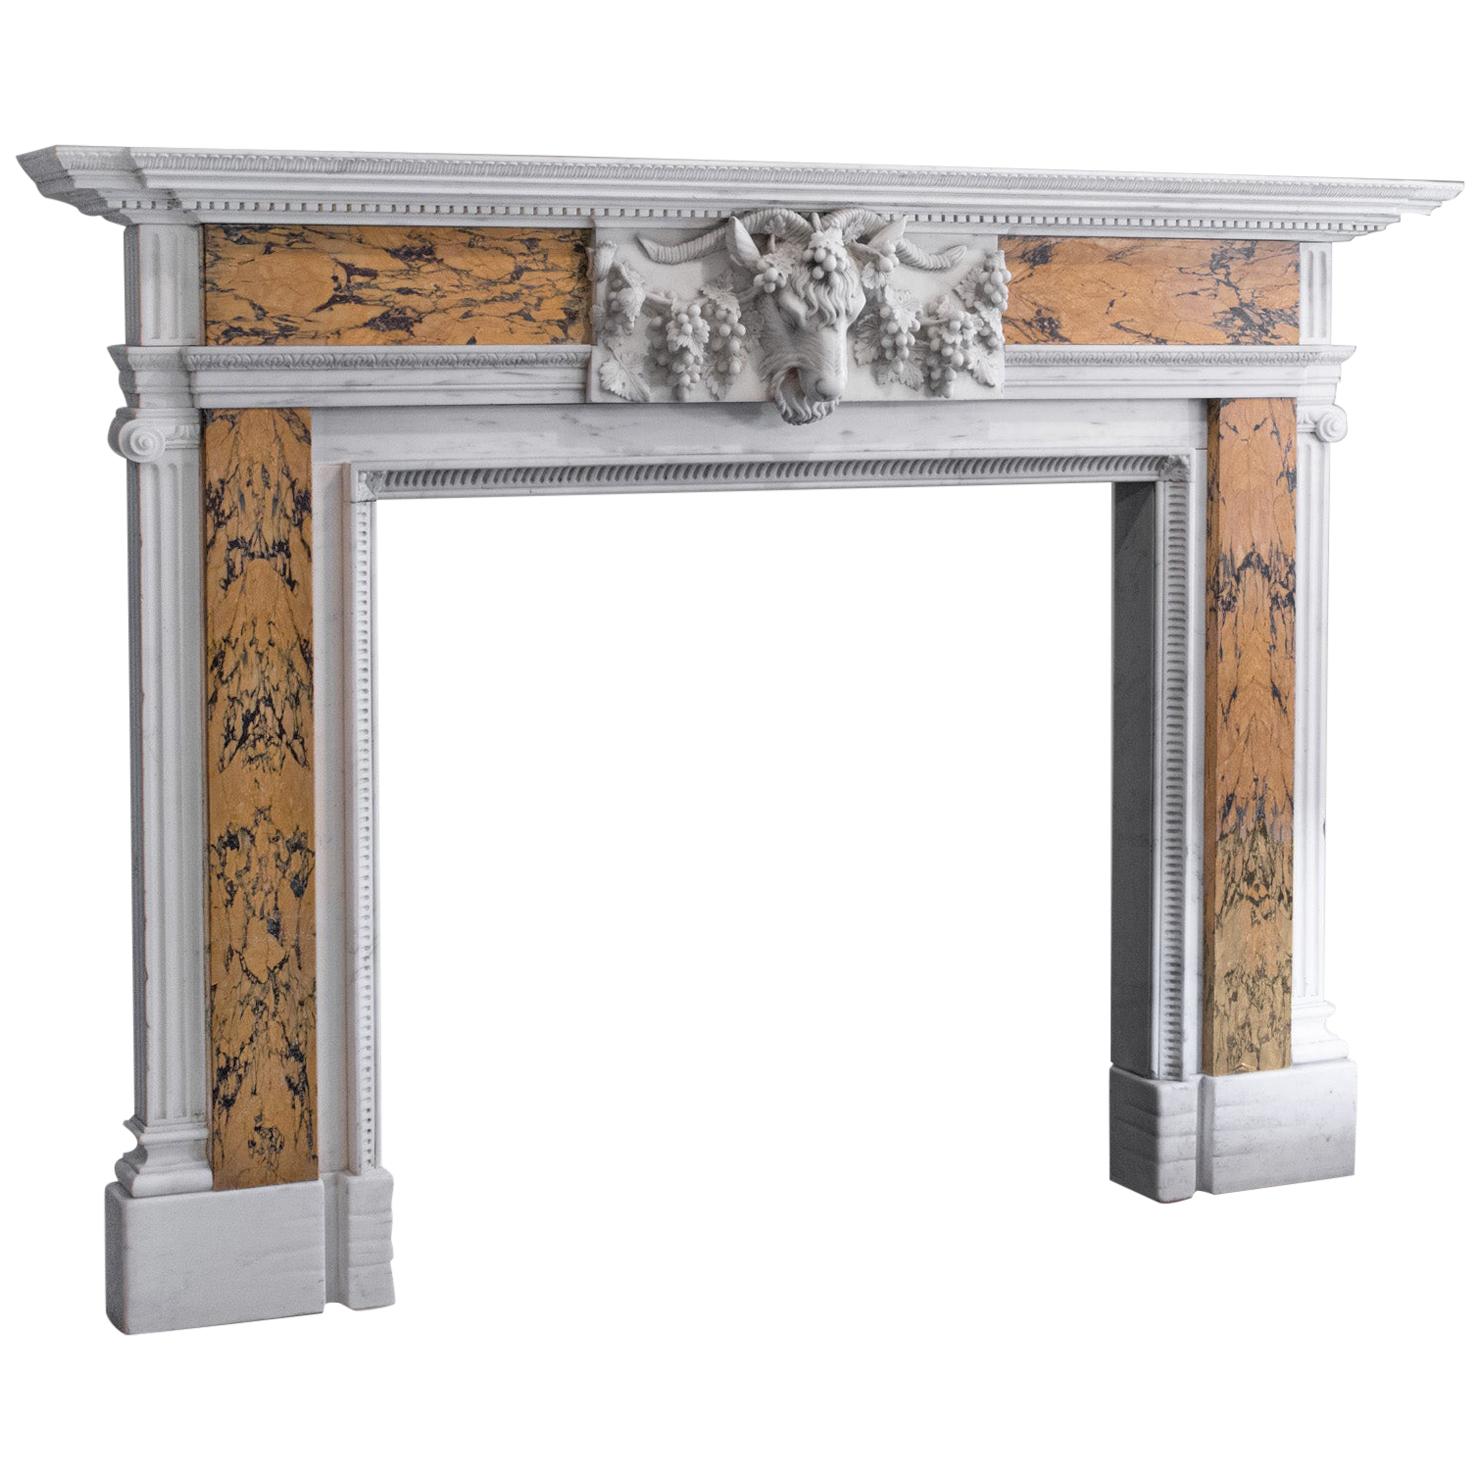 Georgian Revival Marble Fireplace, English, Fire Surround, Dominic Hurley For Sale